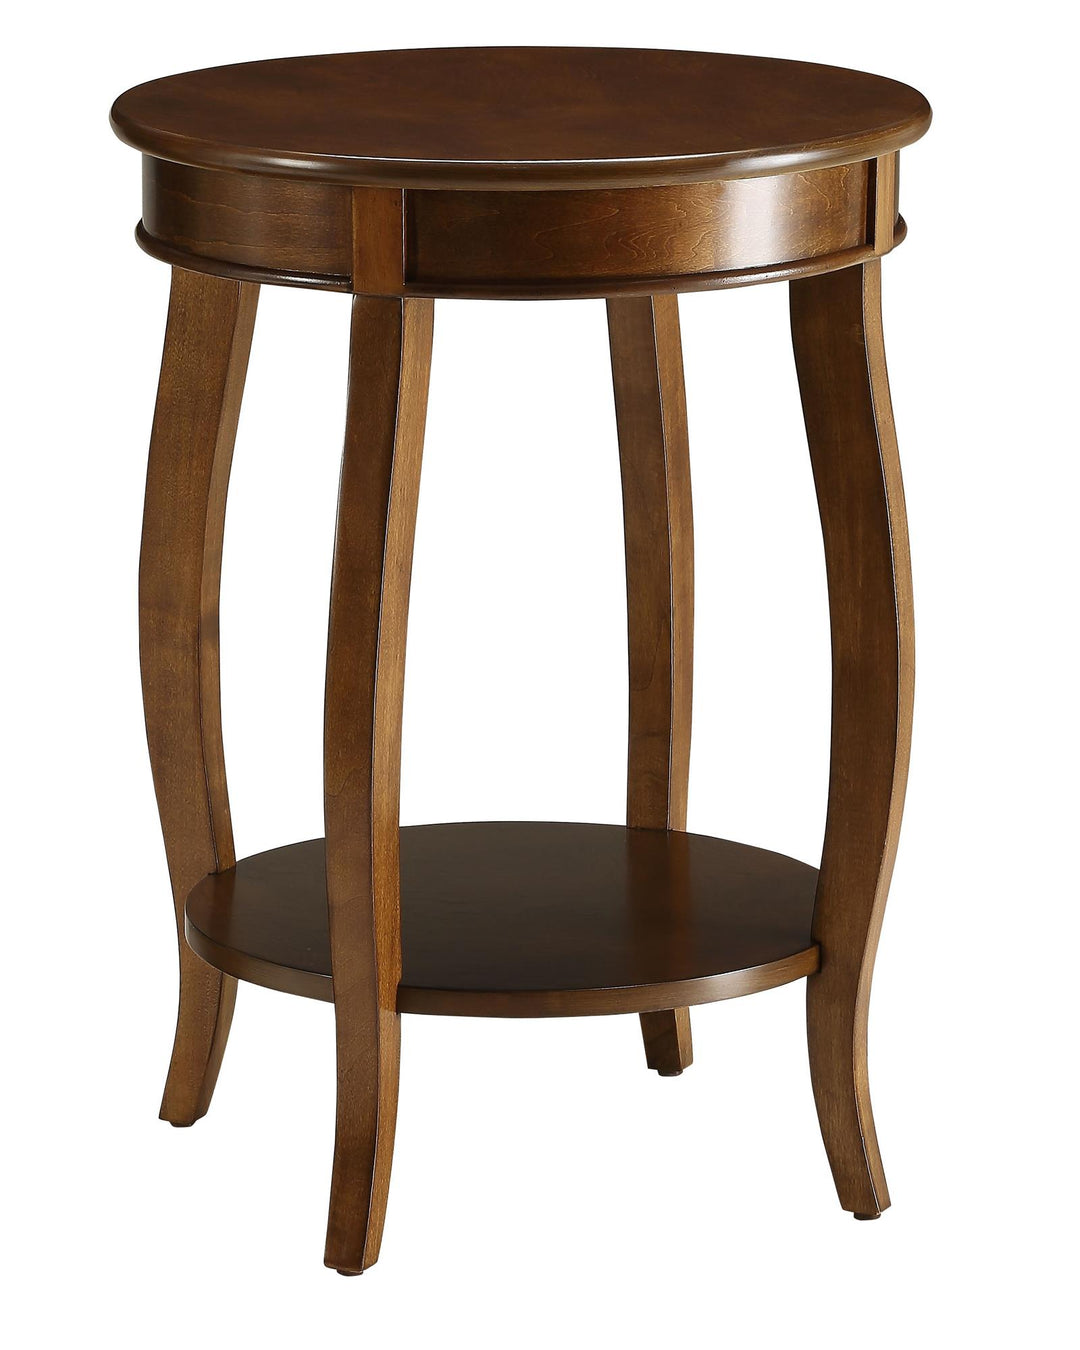 Accent Table with Round top and Stylized Legs - Walnut